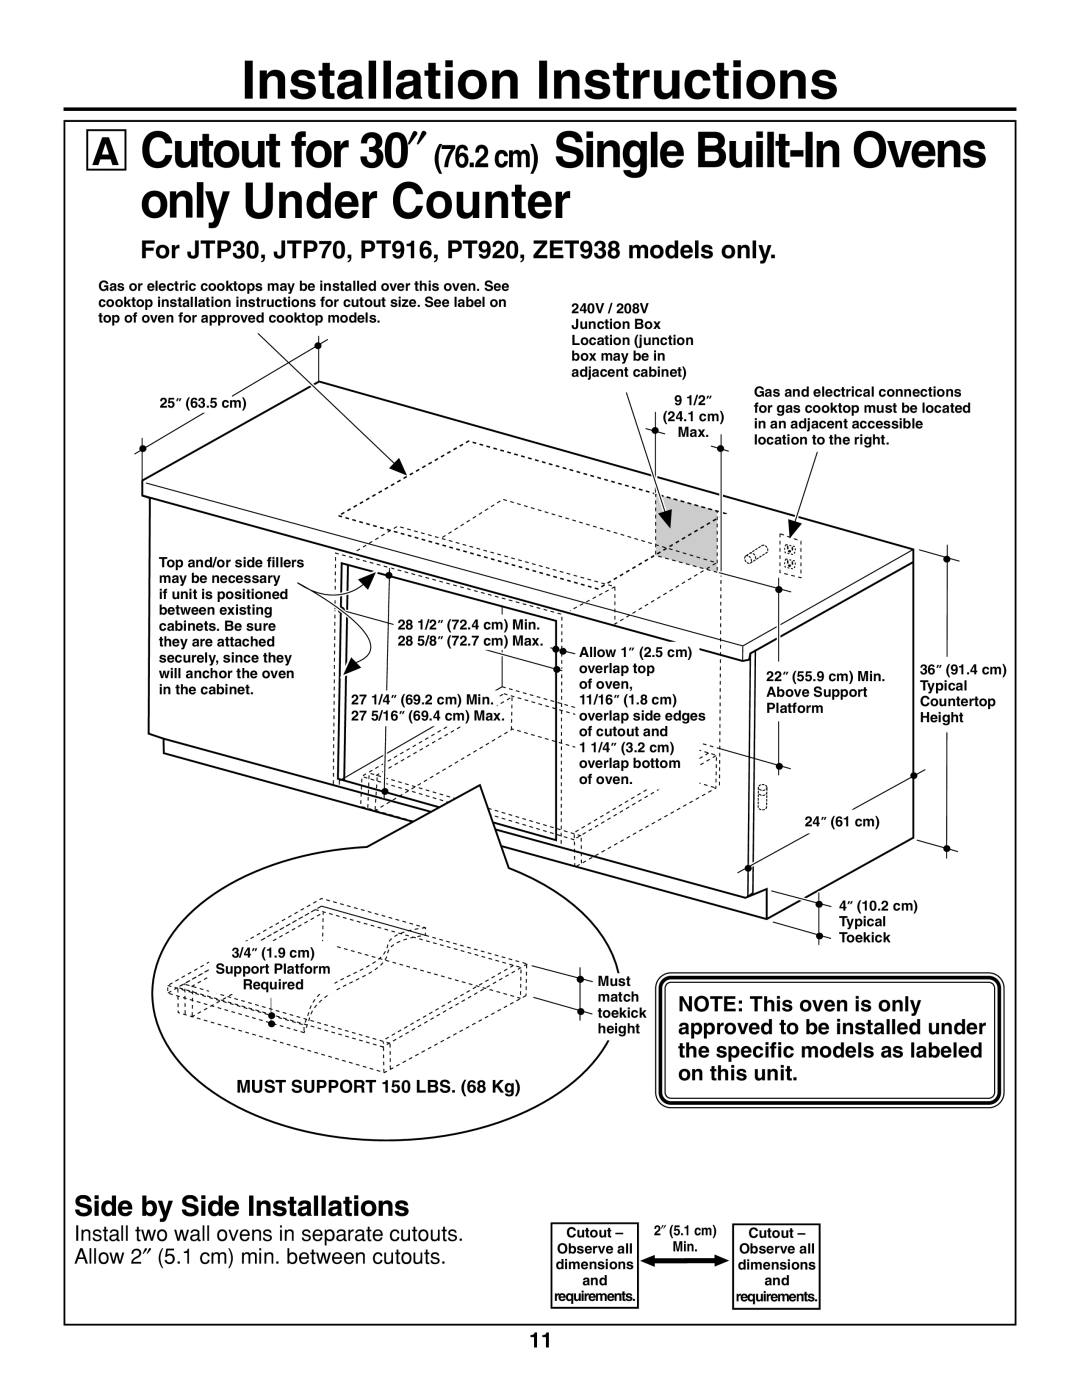 GE r08654v-1 Cutout for 30″ 76.2 cm Single Built-In Ovens only Under Counter, Installation Instructions 